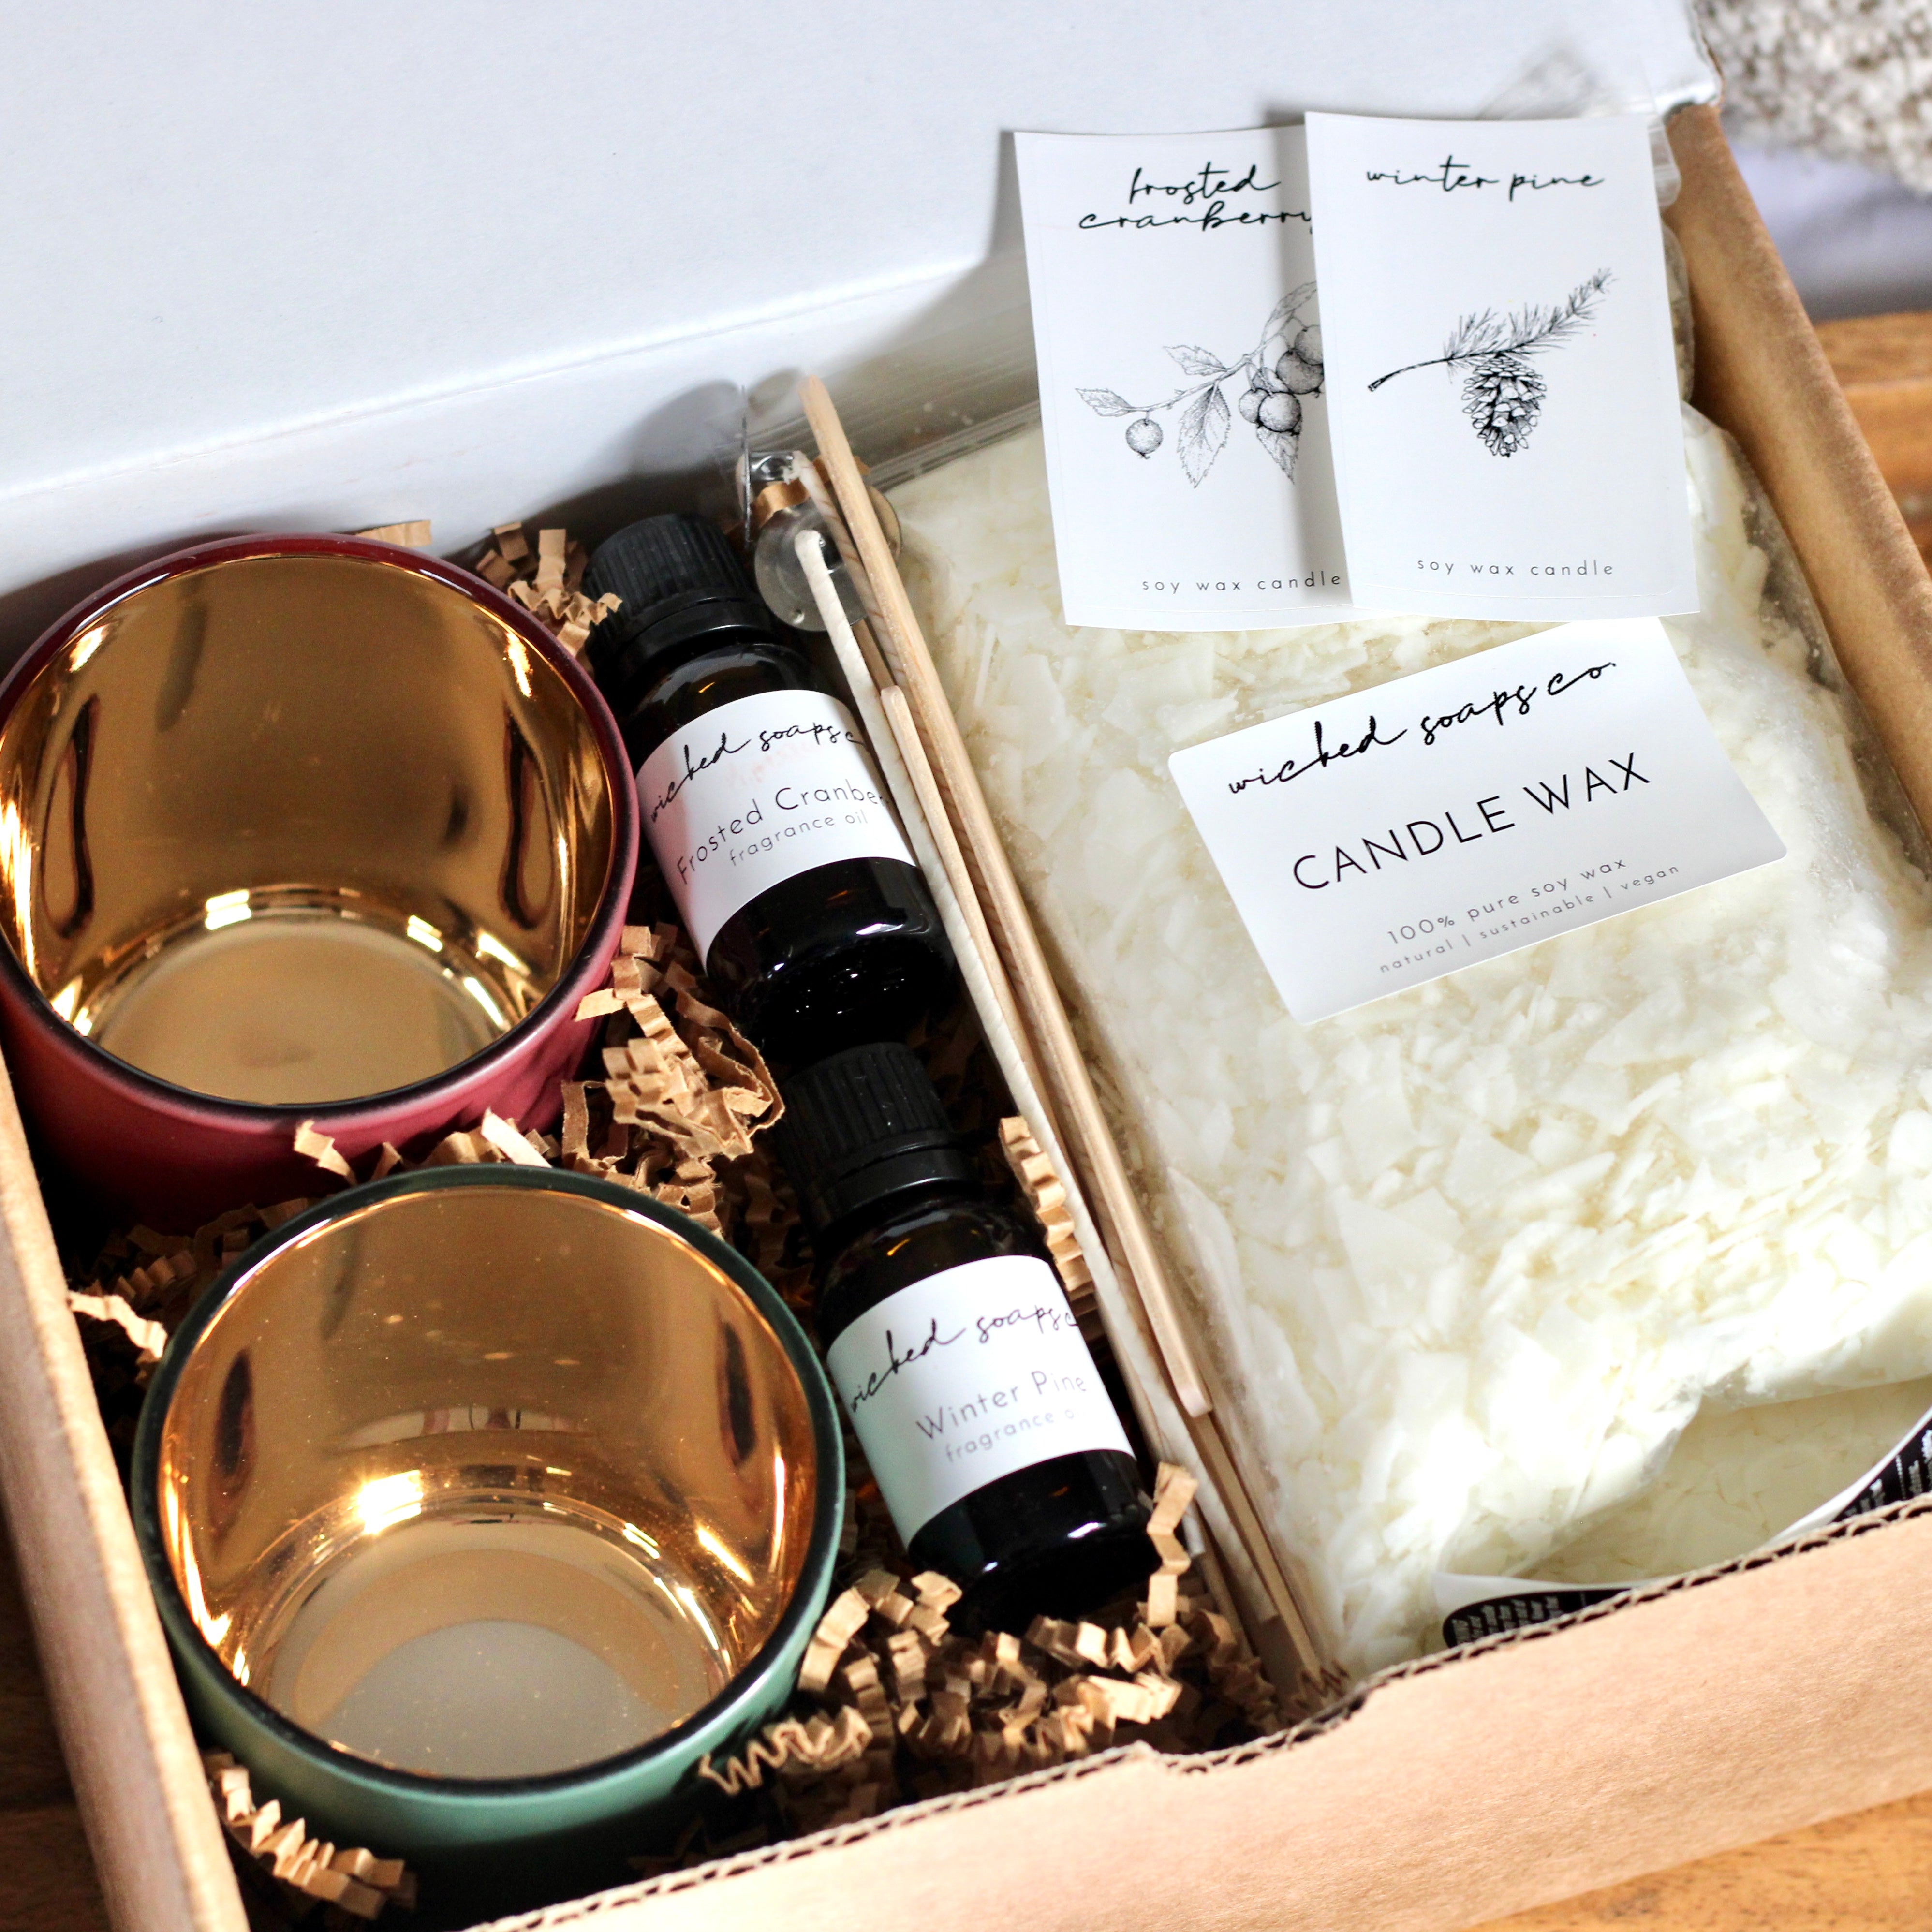 Pine-Scented Candle Making Kit